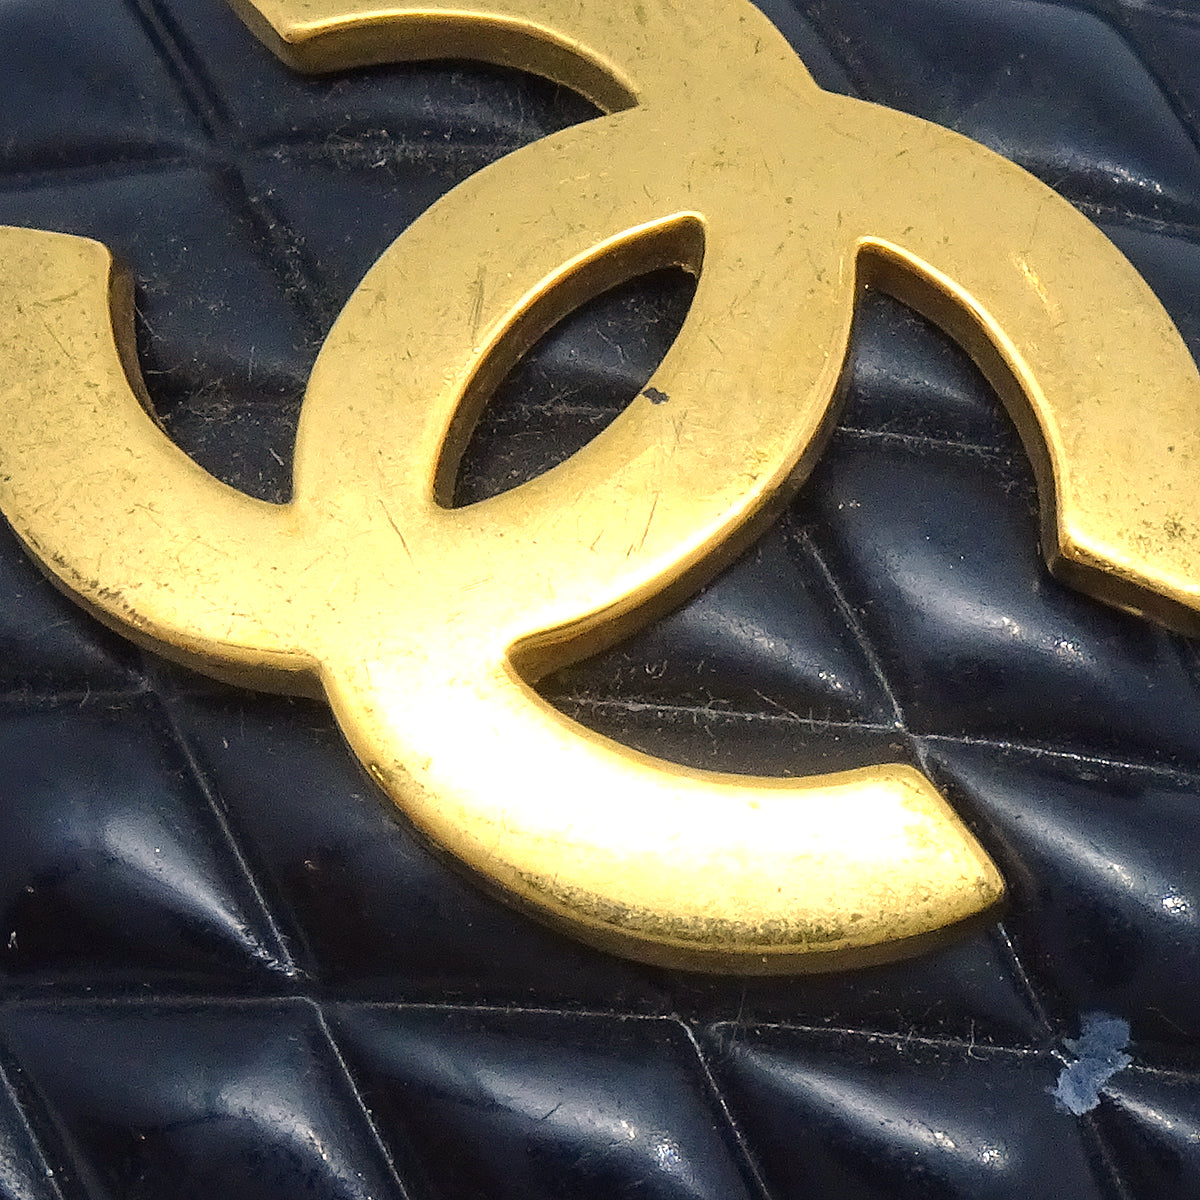 Chanel 1994 Quilted Black &amp; Gold Earrings